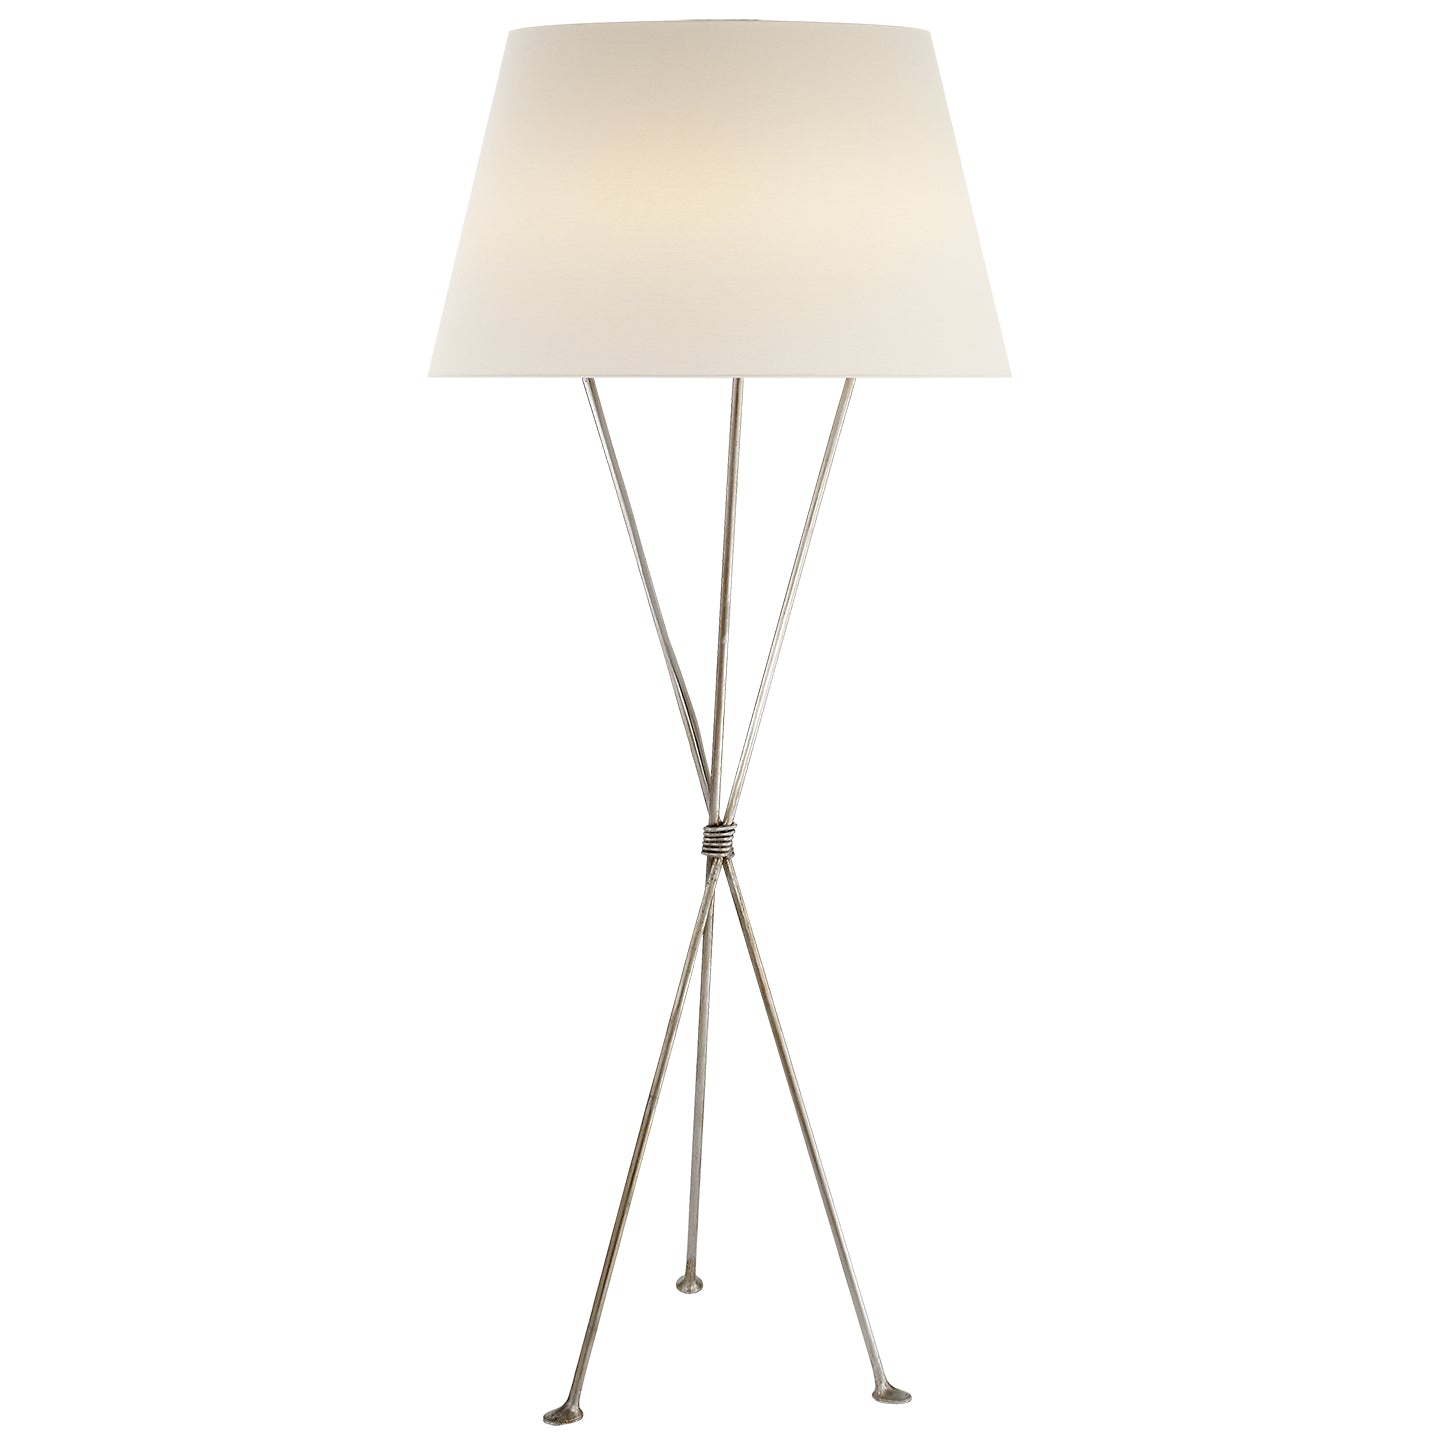 One Light Floor Lamp from the Lebon collection in Burnished Silver Leaf finish